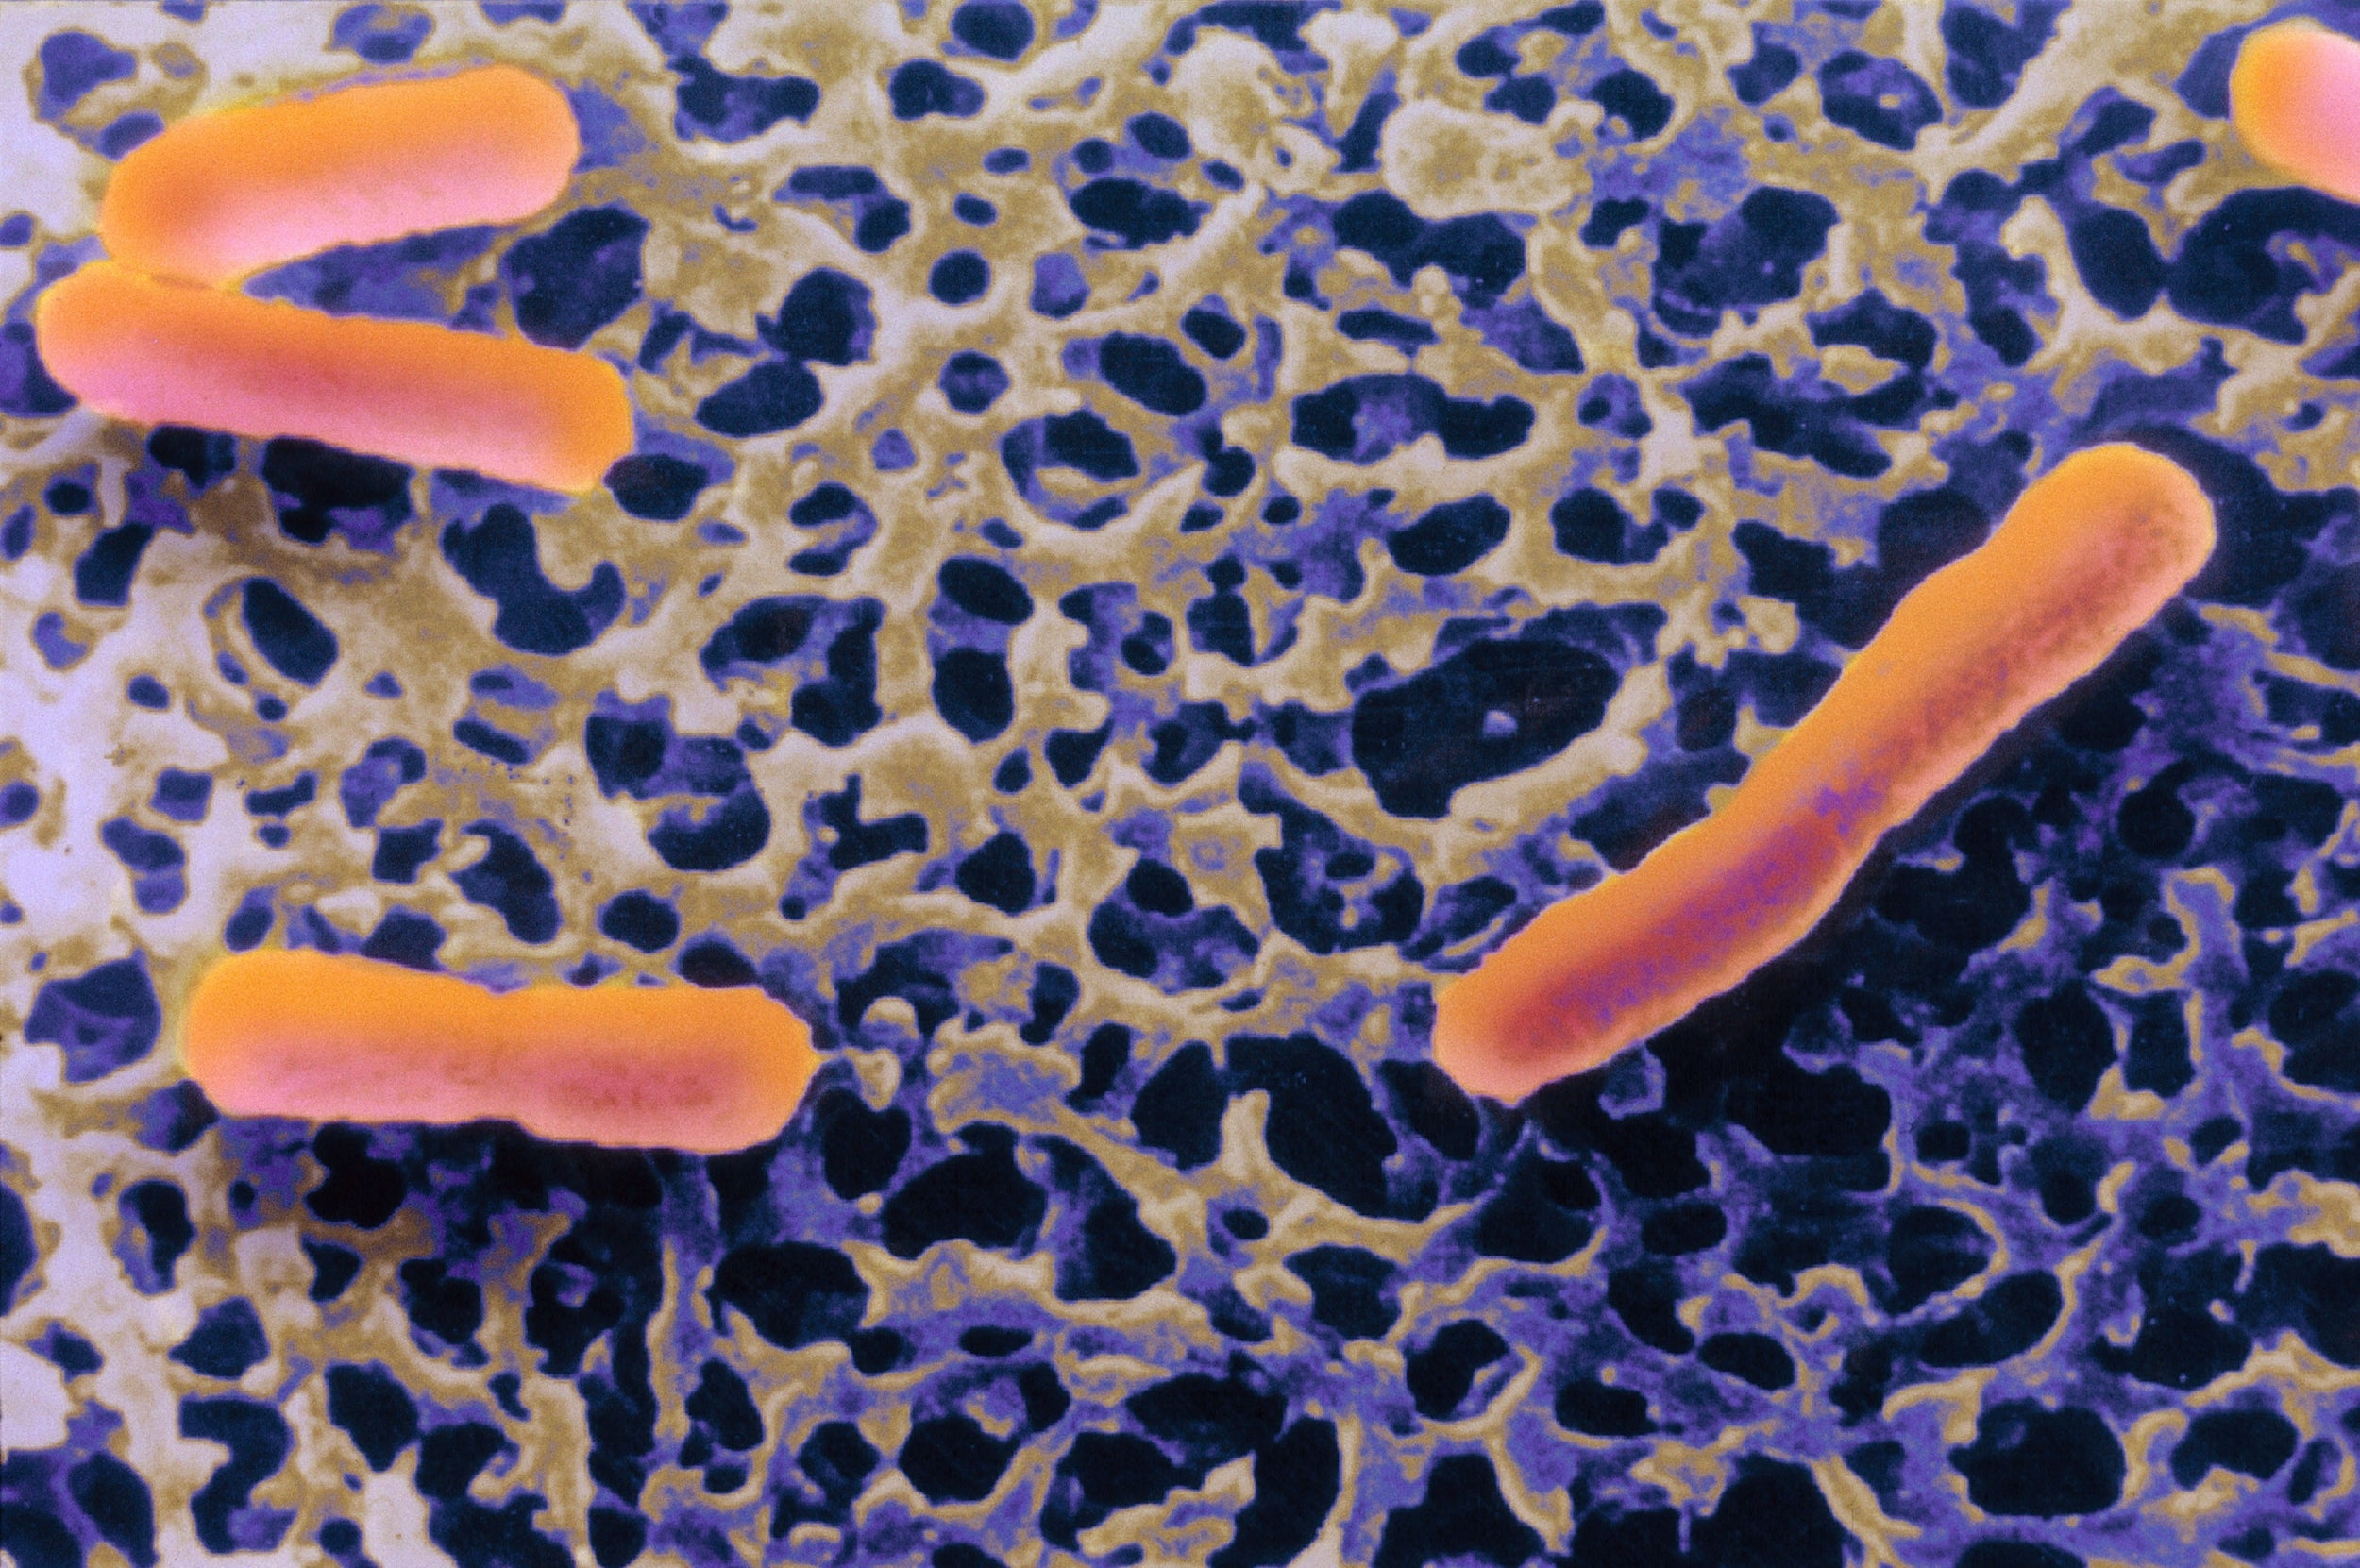 Shigella flexneri, the bacterium that causes dysentery